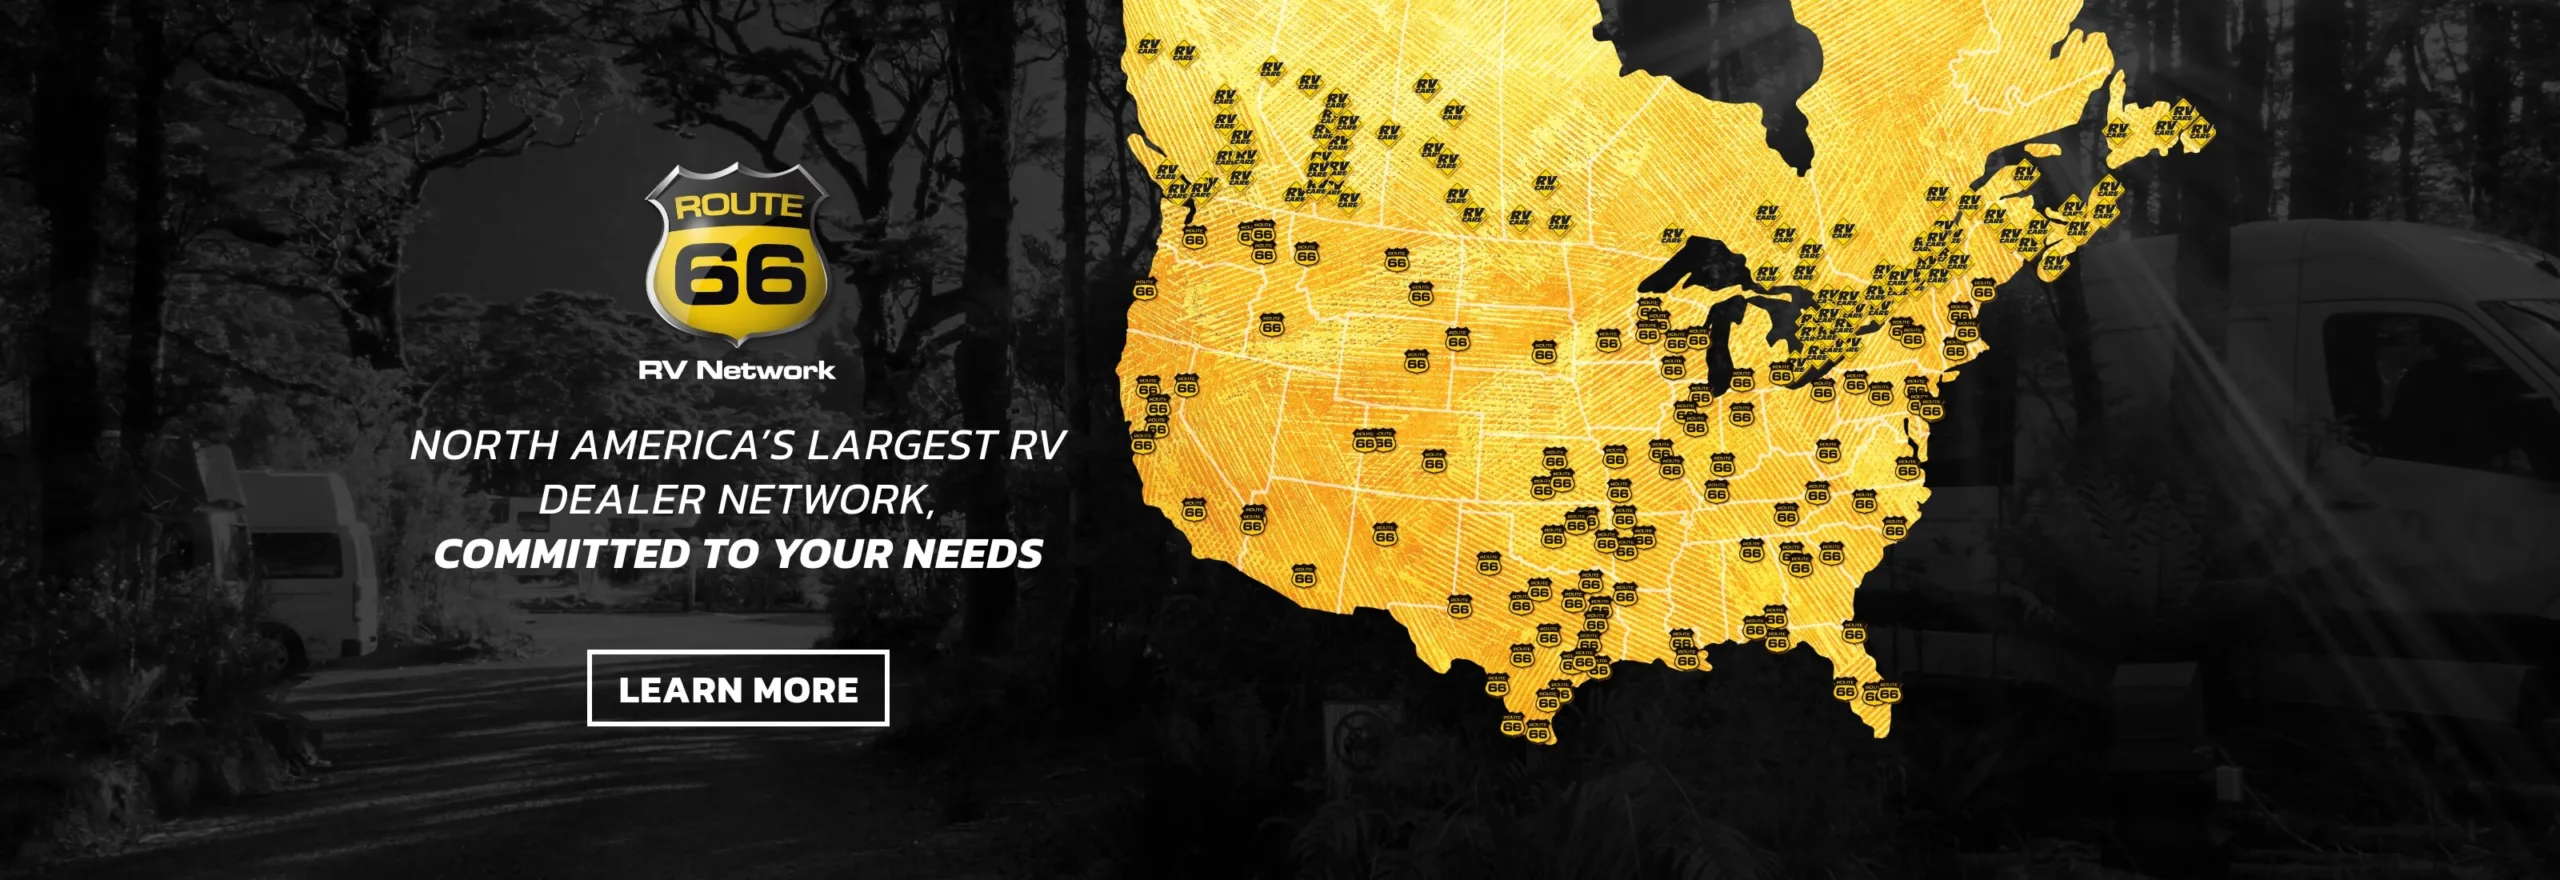 map of united states, logo of Route 66 RV Network, text that reads: North America's Largest RV Dealer Network, Committed to your needs, button that reads: learn more